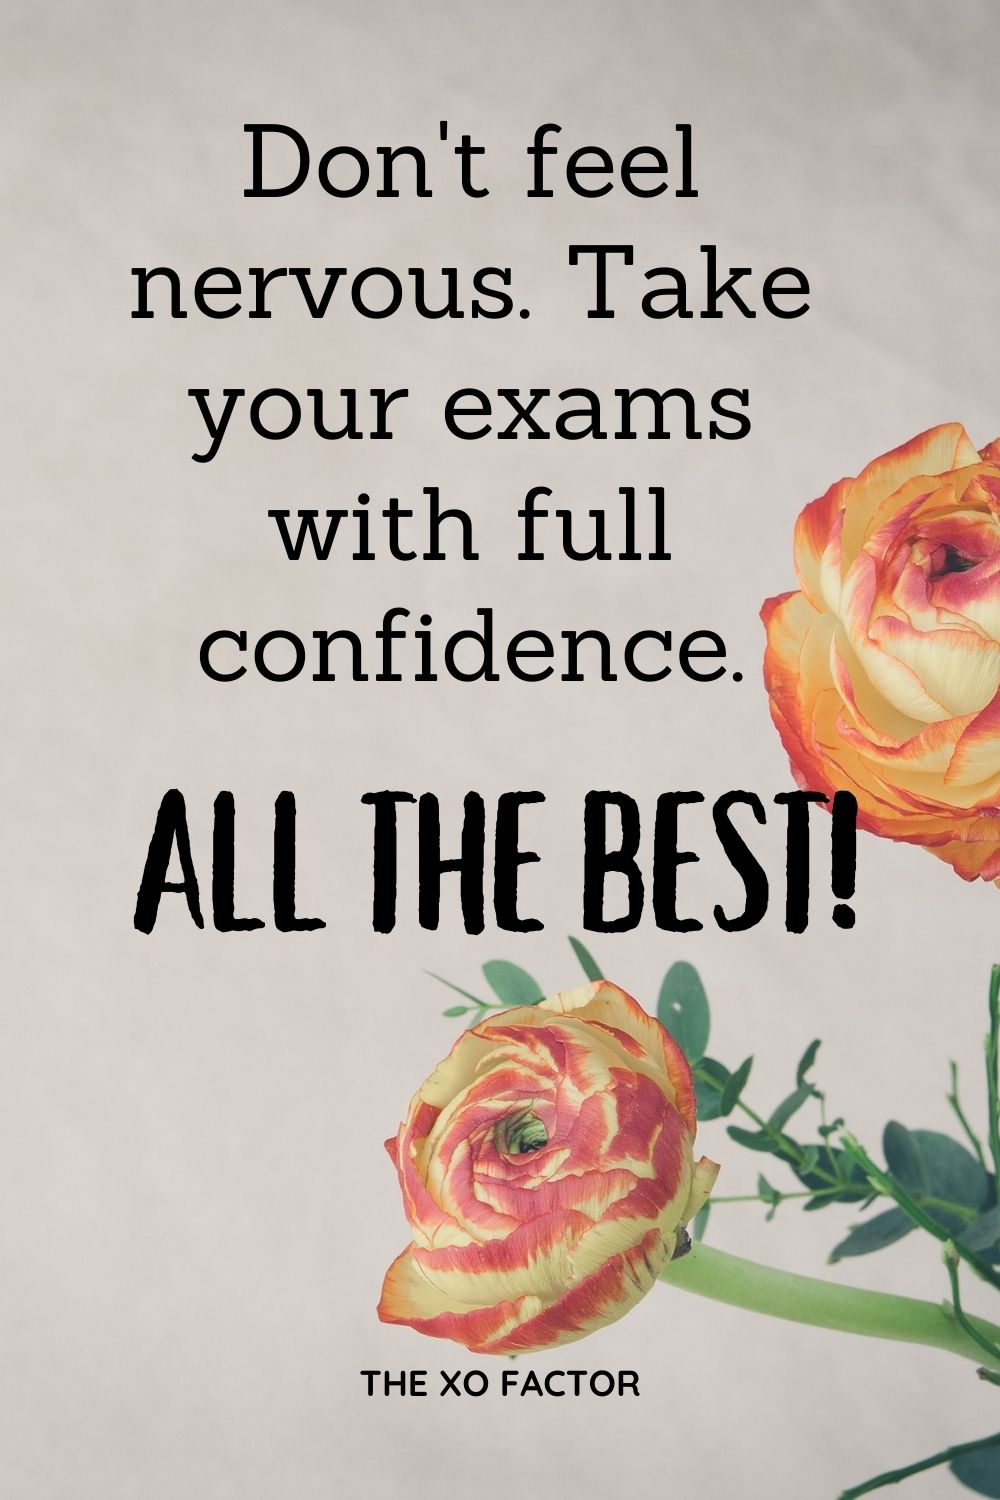 Don't feel nervous. Take your exams with full confidence. All the best!